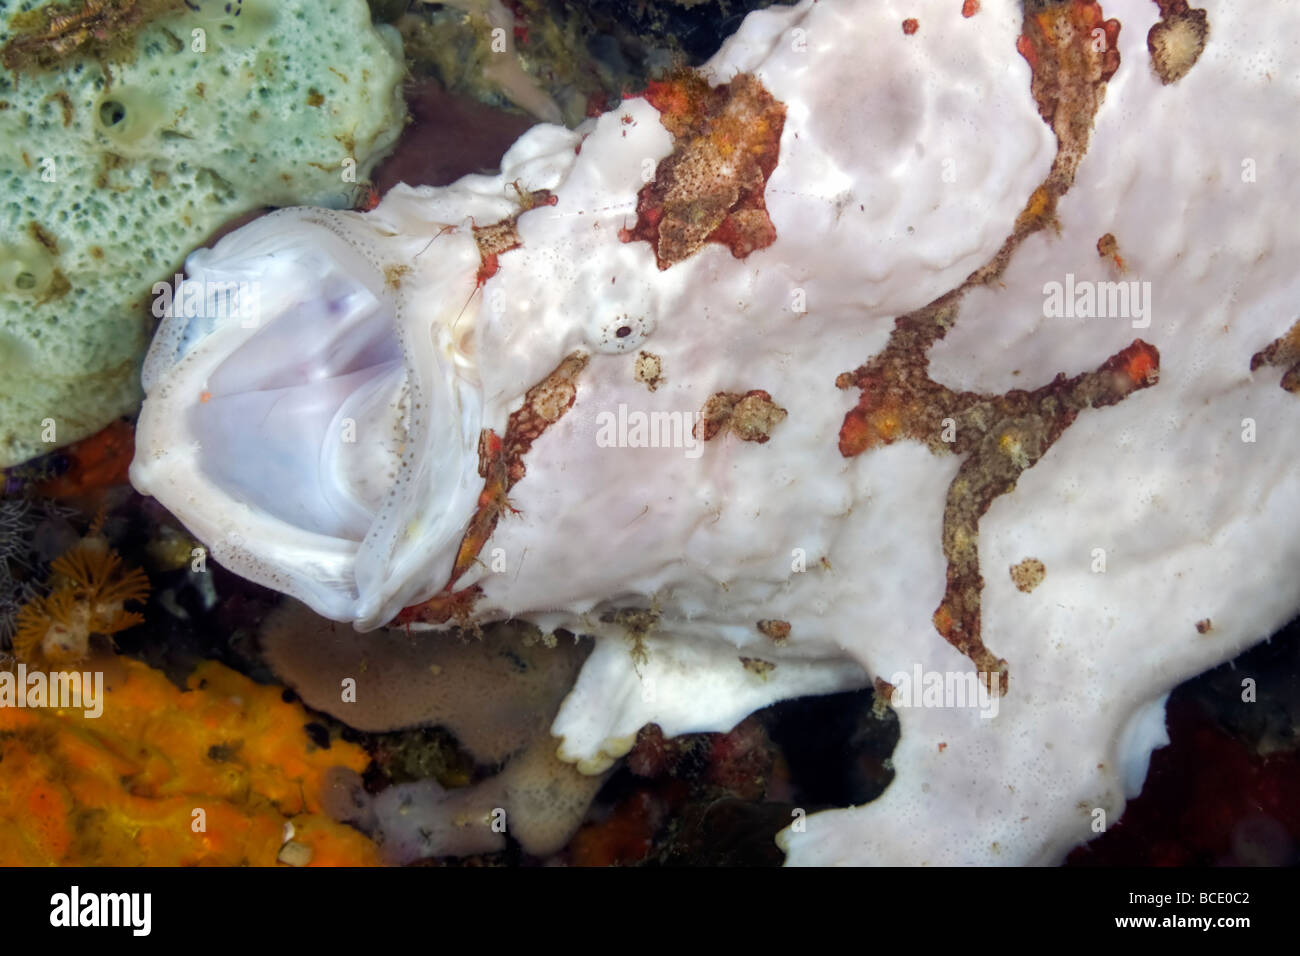 A white Painted Frogfish exhibits his gaping mouth on a coral reef in the Flores Sea near Komodo Island, Indonesia. Stock Photo